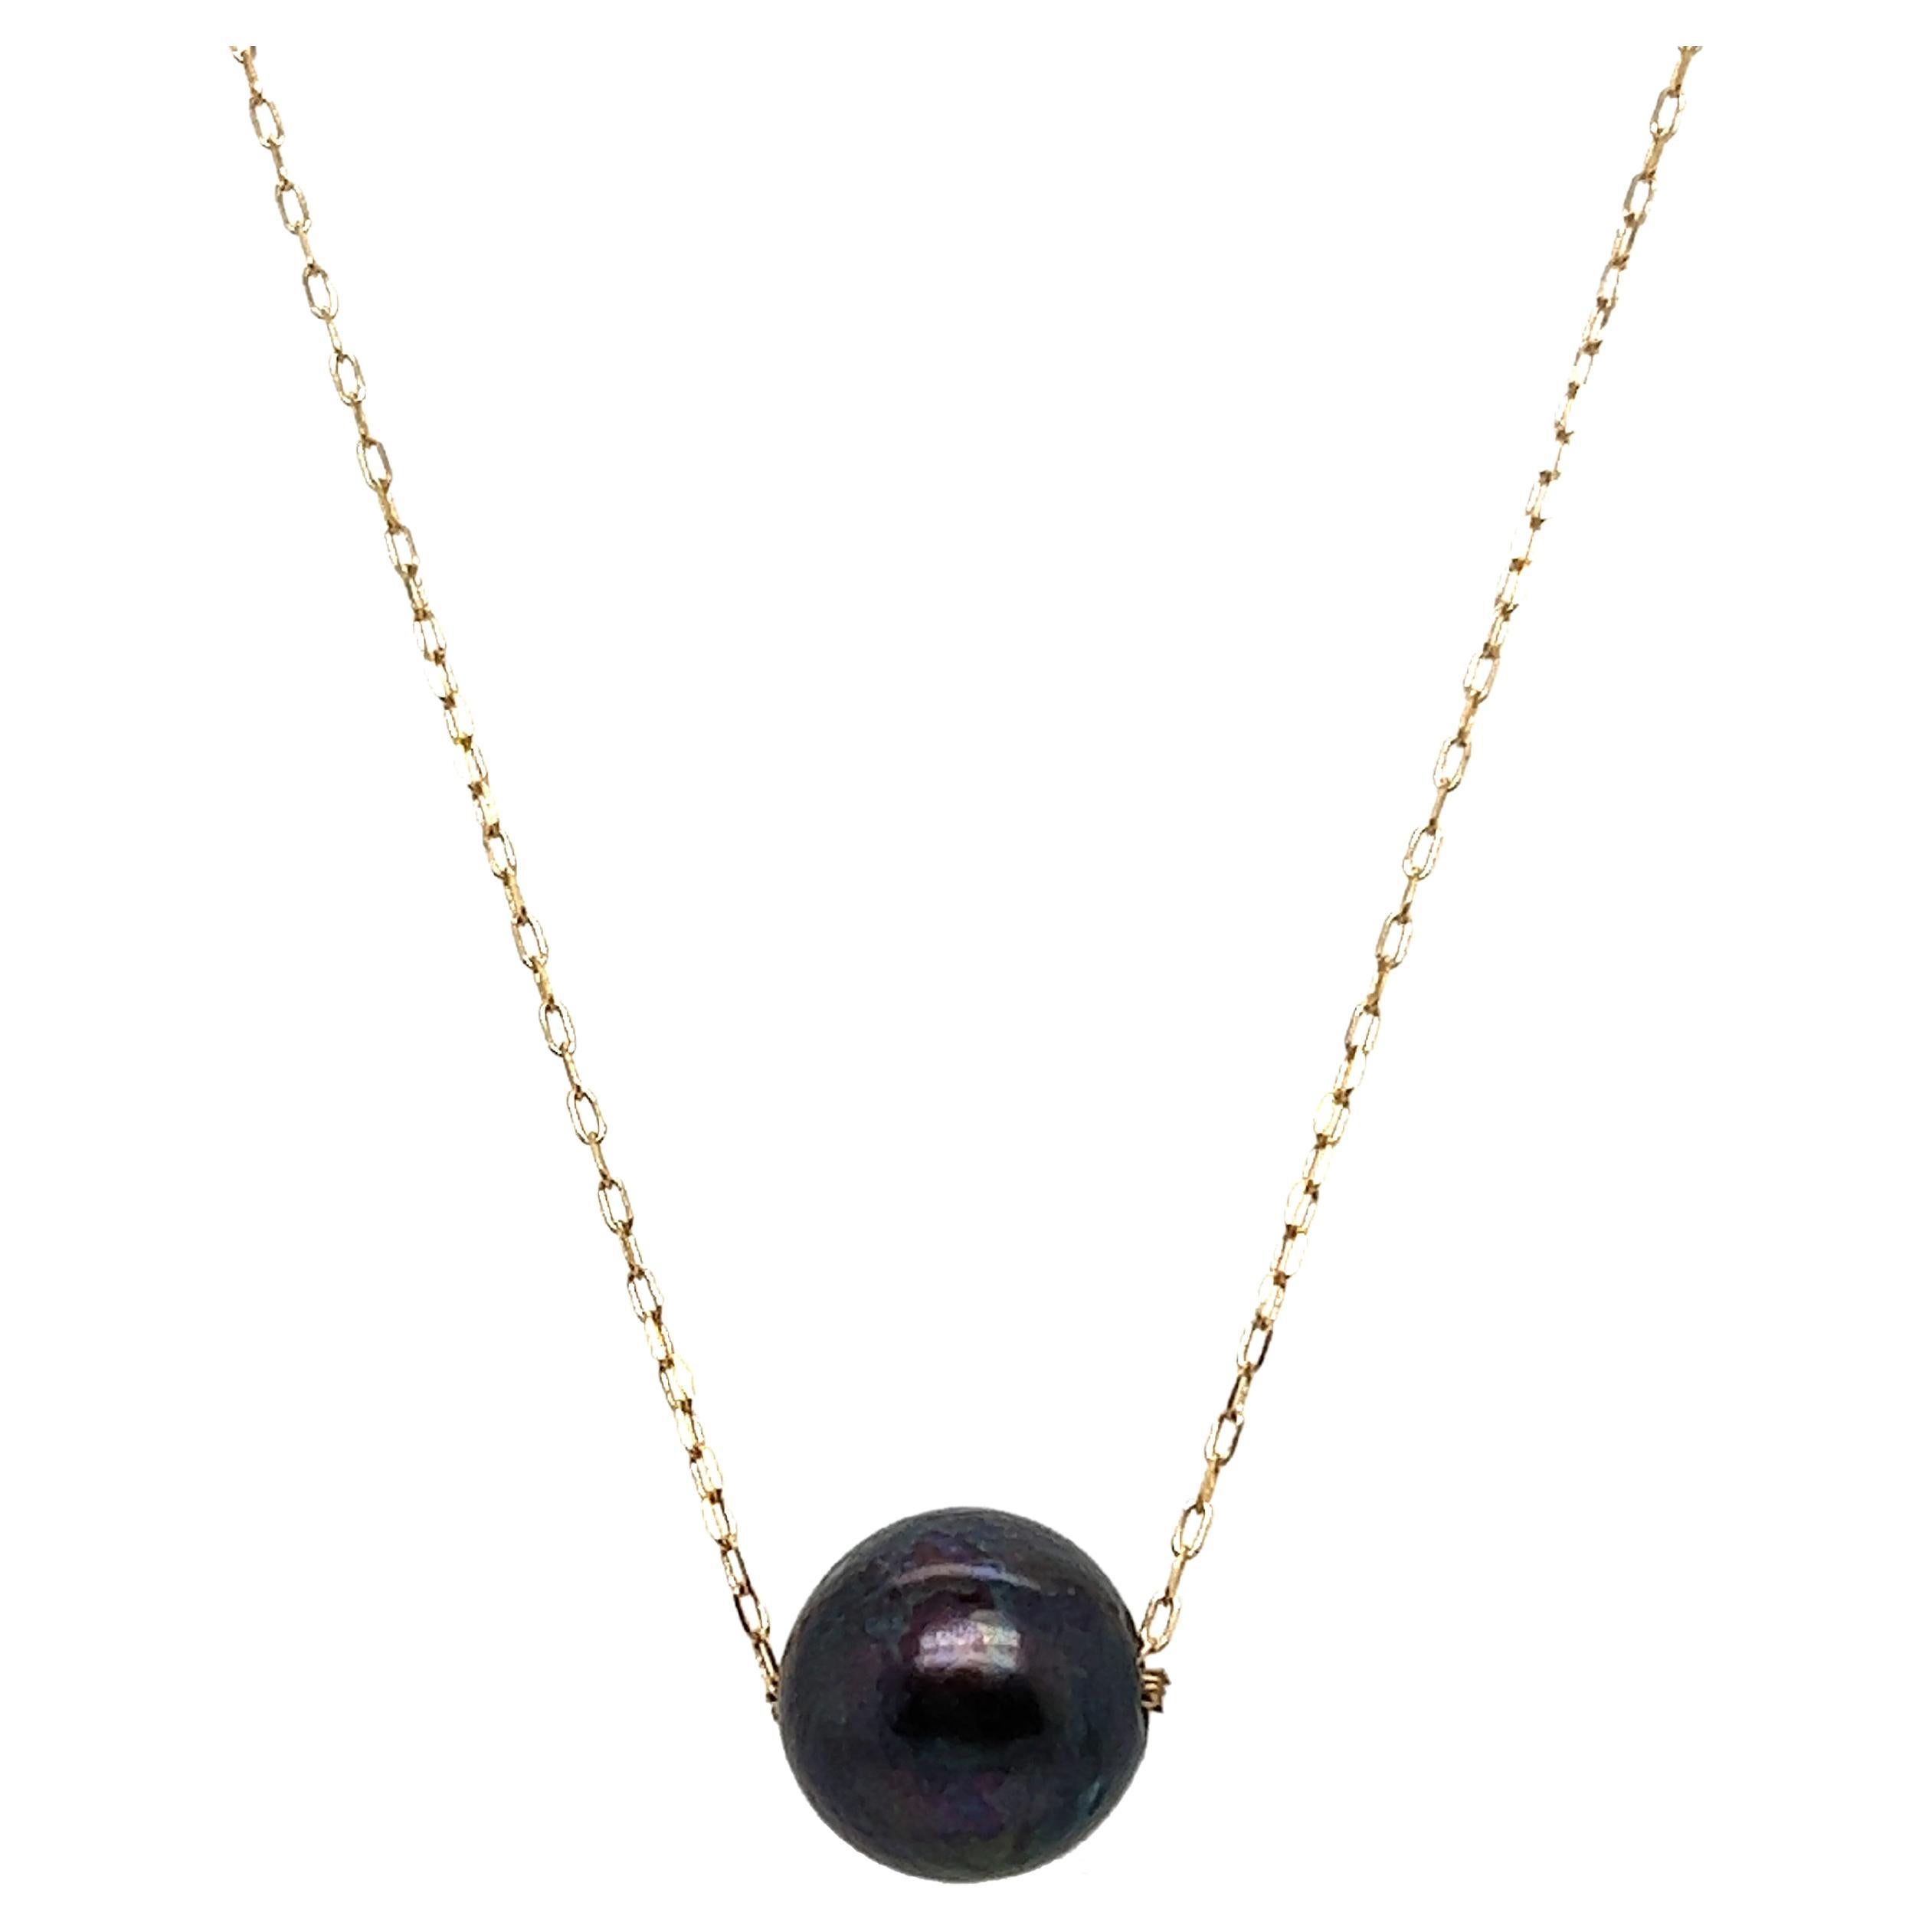 High Quality Tahitian Black Pearl Necklace Pendant 18k Yellow Gold